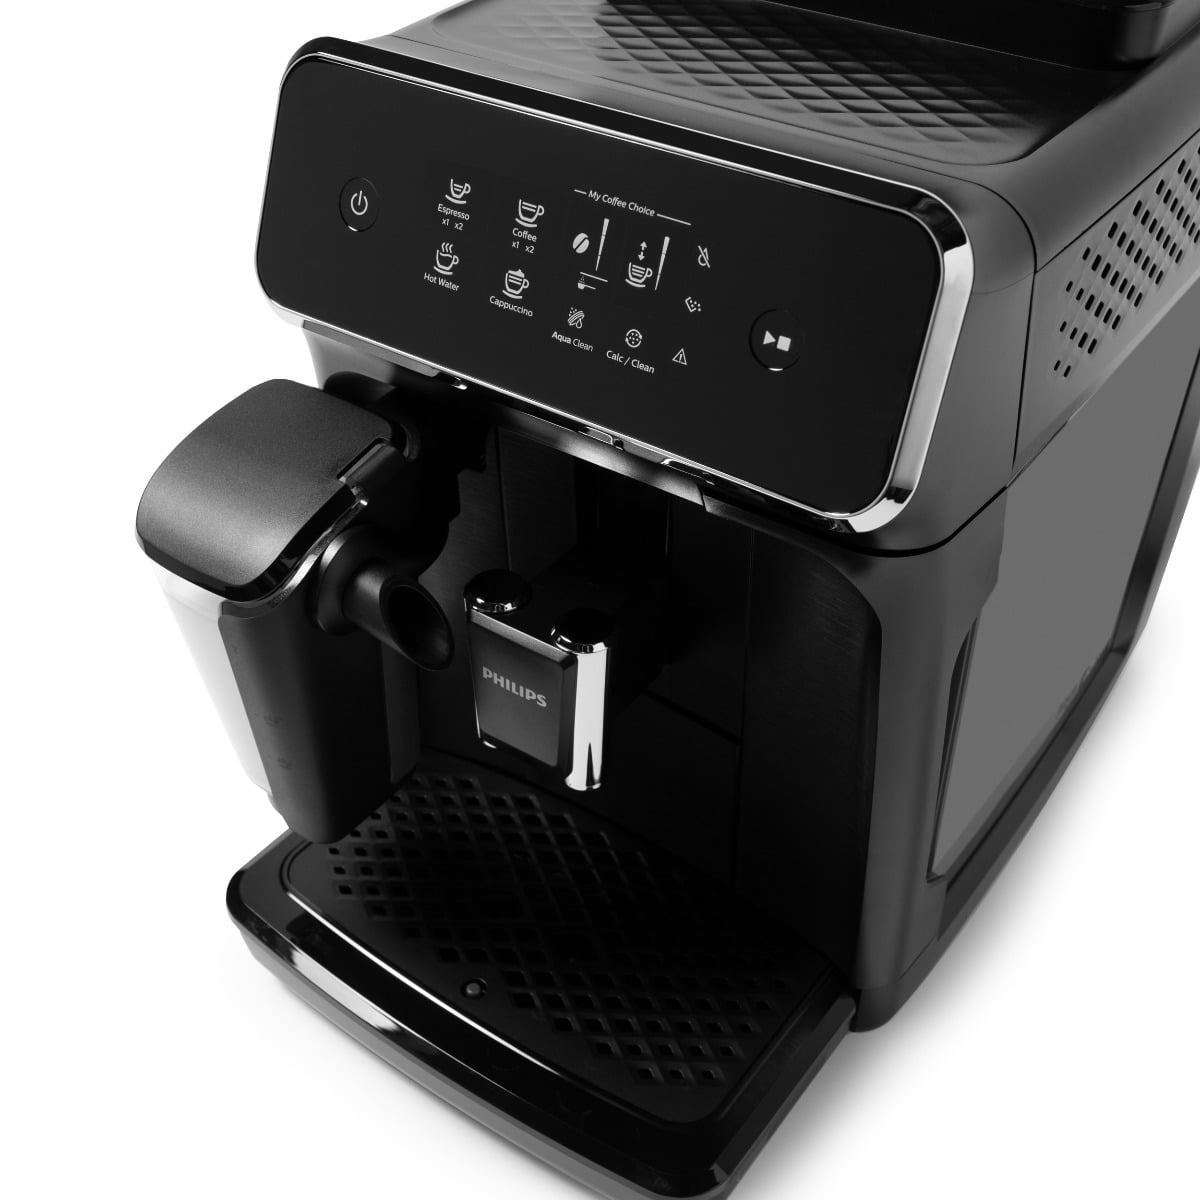 Philips Series 2200 LatteGo EP2235/40 Automatic coffee maker with frother,  Black-zinc brown